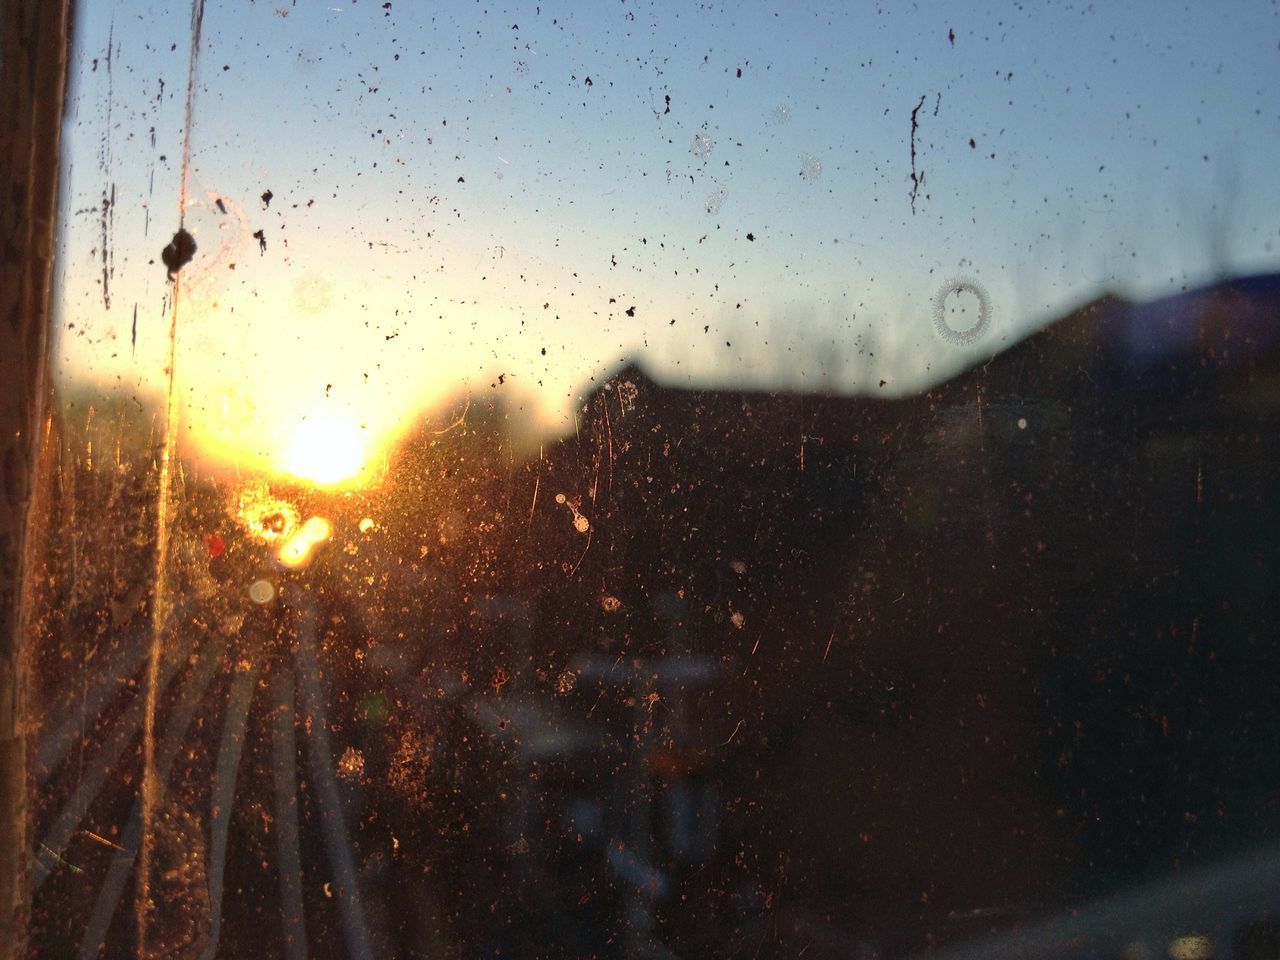 sunset, window, drop, transparent, sky, wet, nature, water, glass - material, silhouette, sun, beauty in nature, flying, animal themes, weather, no people, indoors, tranquility, dusk, focus on foreground